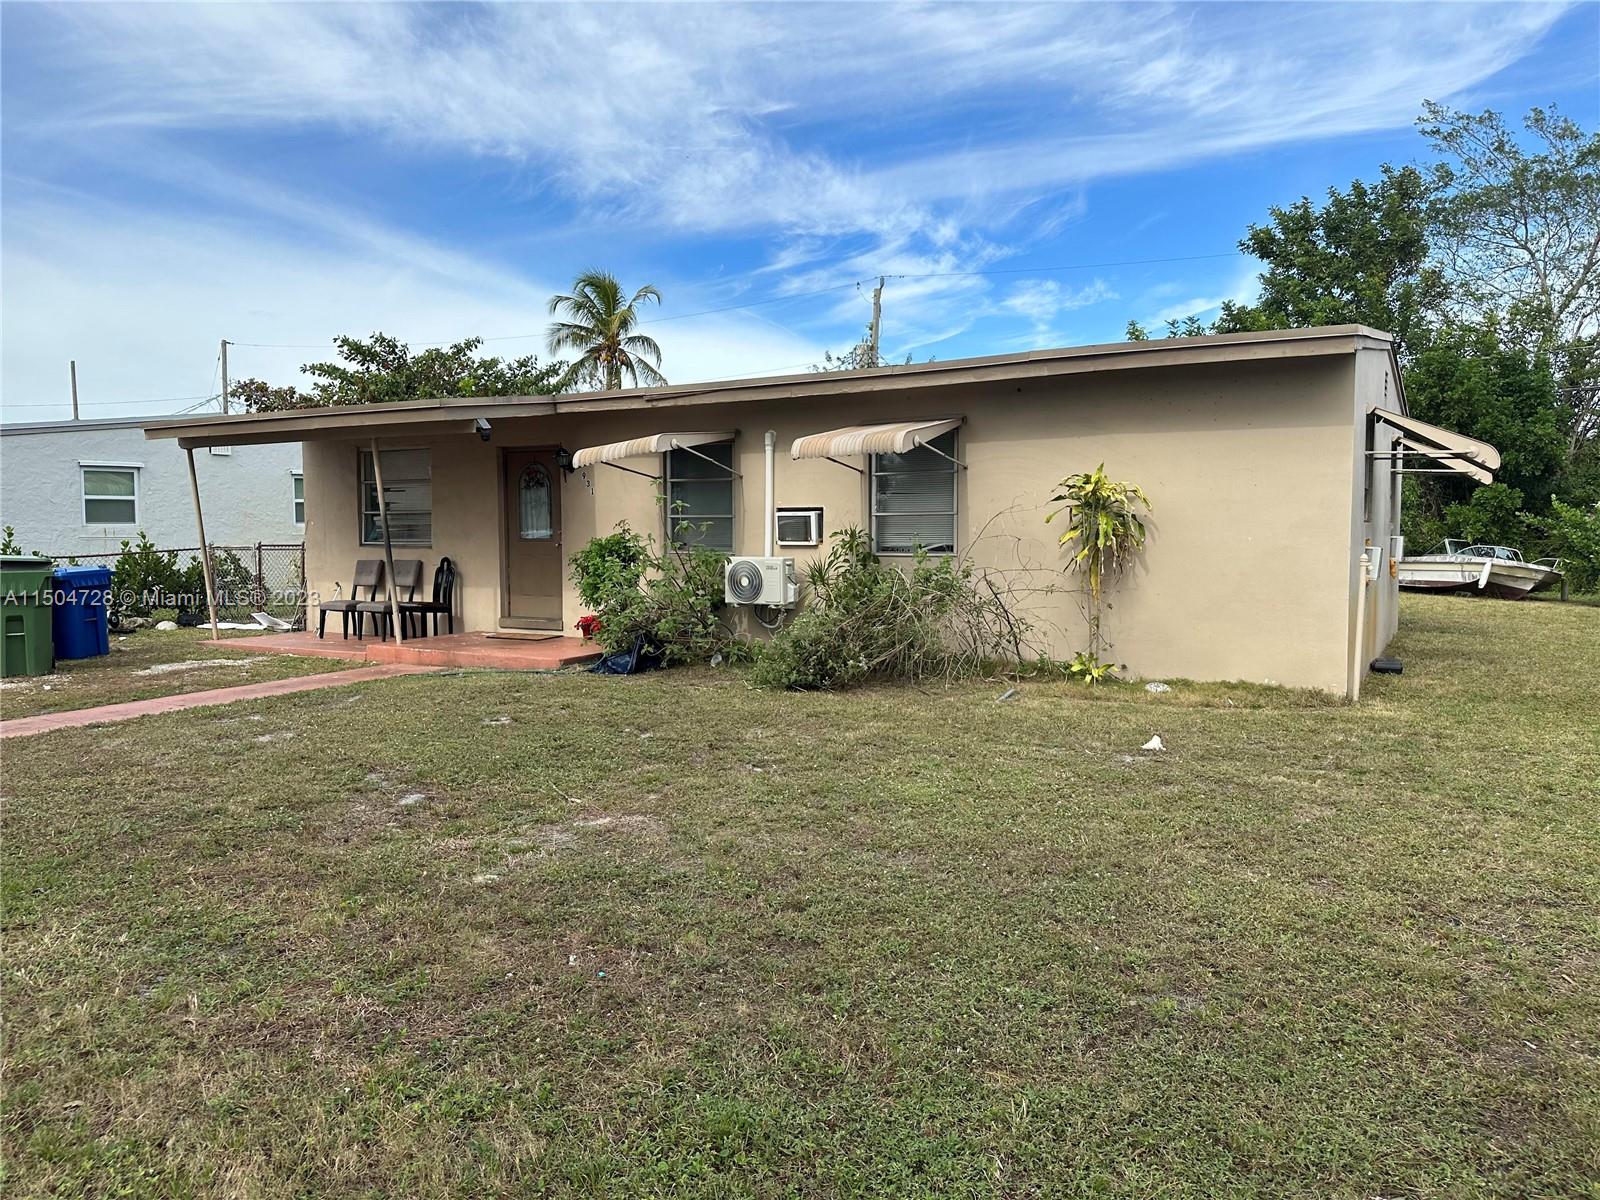 Property for Sale at 931 Chateau Park Dr, Fort Lauderdale, Broward County, Florida - Bedrooms: 3 
Bathrooms: 1  - $335,000